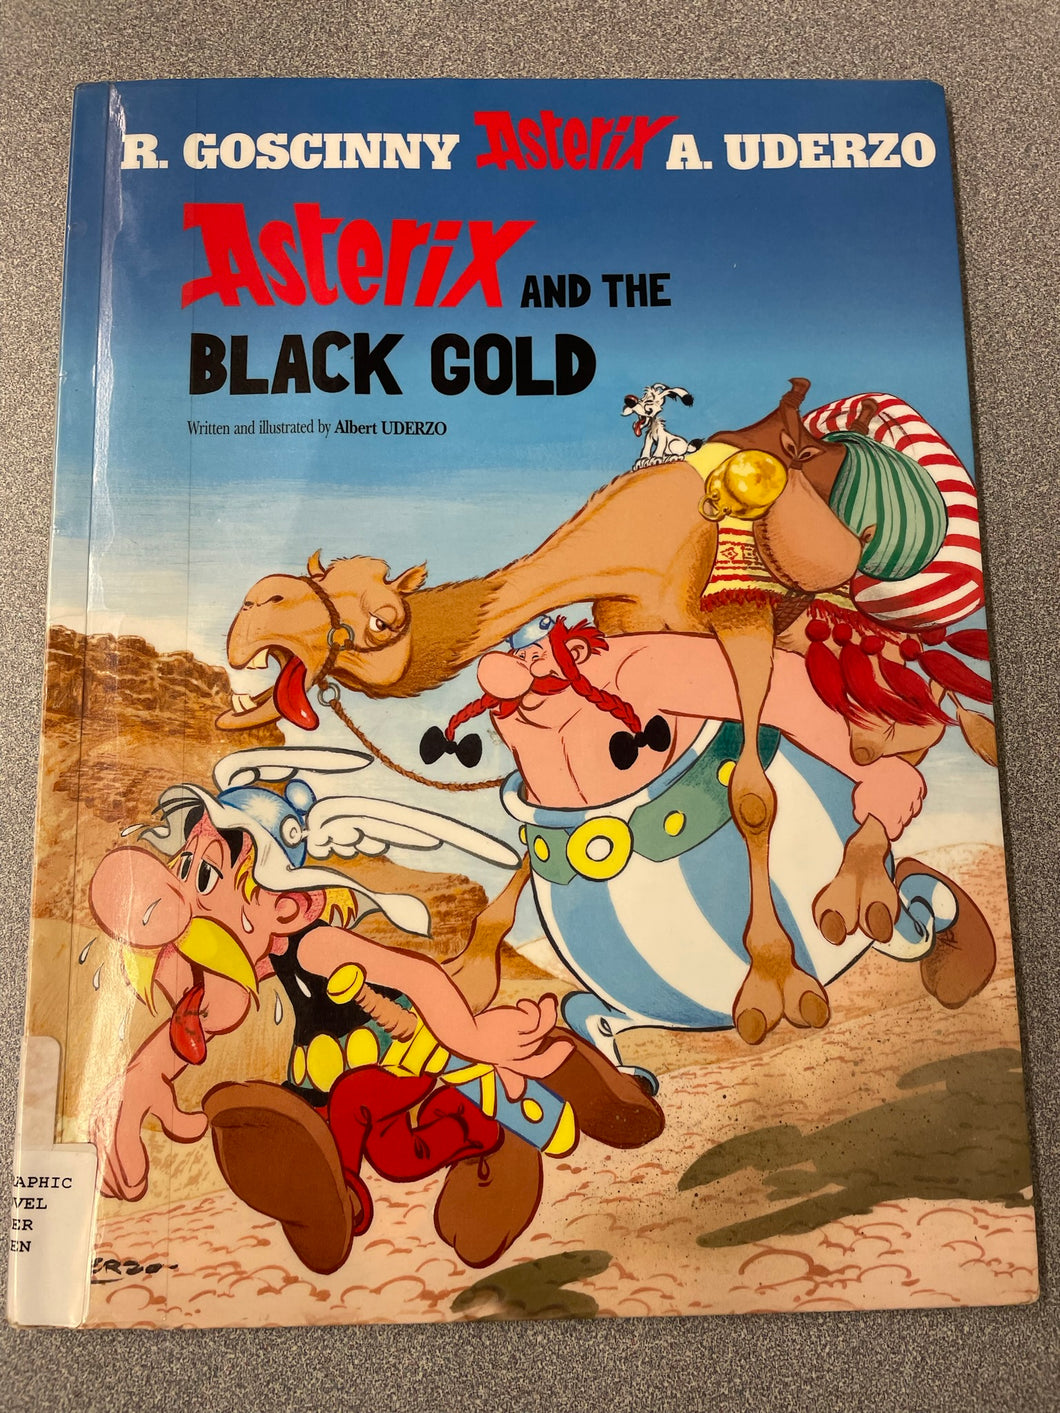 Asterix and the Black Gold, Rene Goscinny and Albert Uderzo 1982 GN